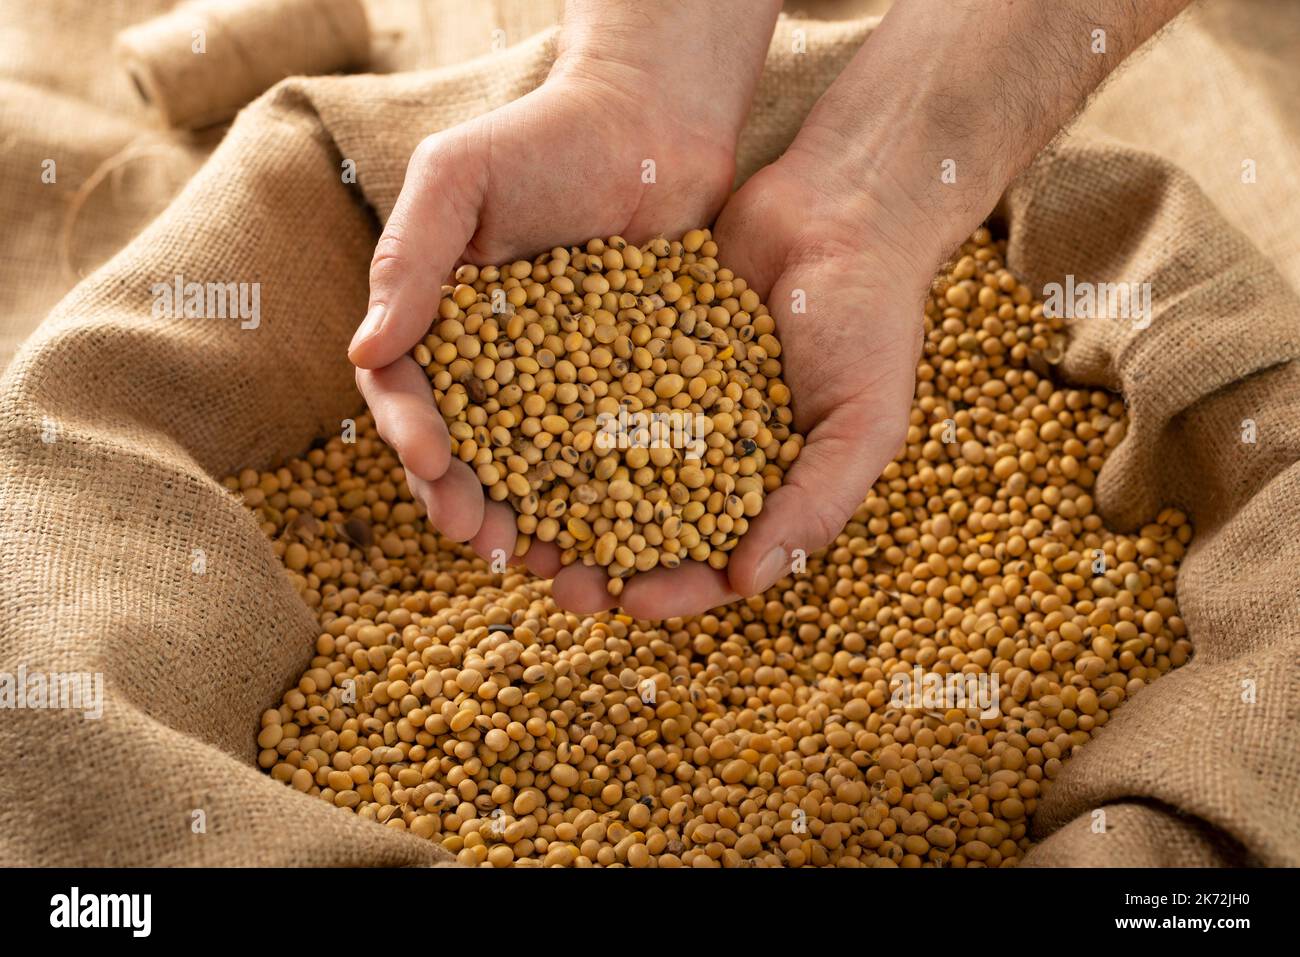 Caucasian male showing soybeans in his hands over burlap sack Stock Photo